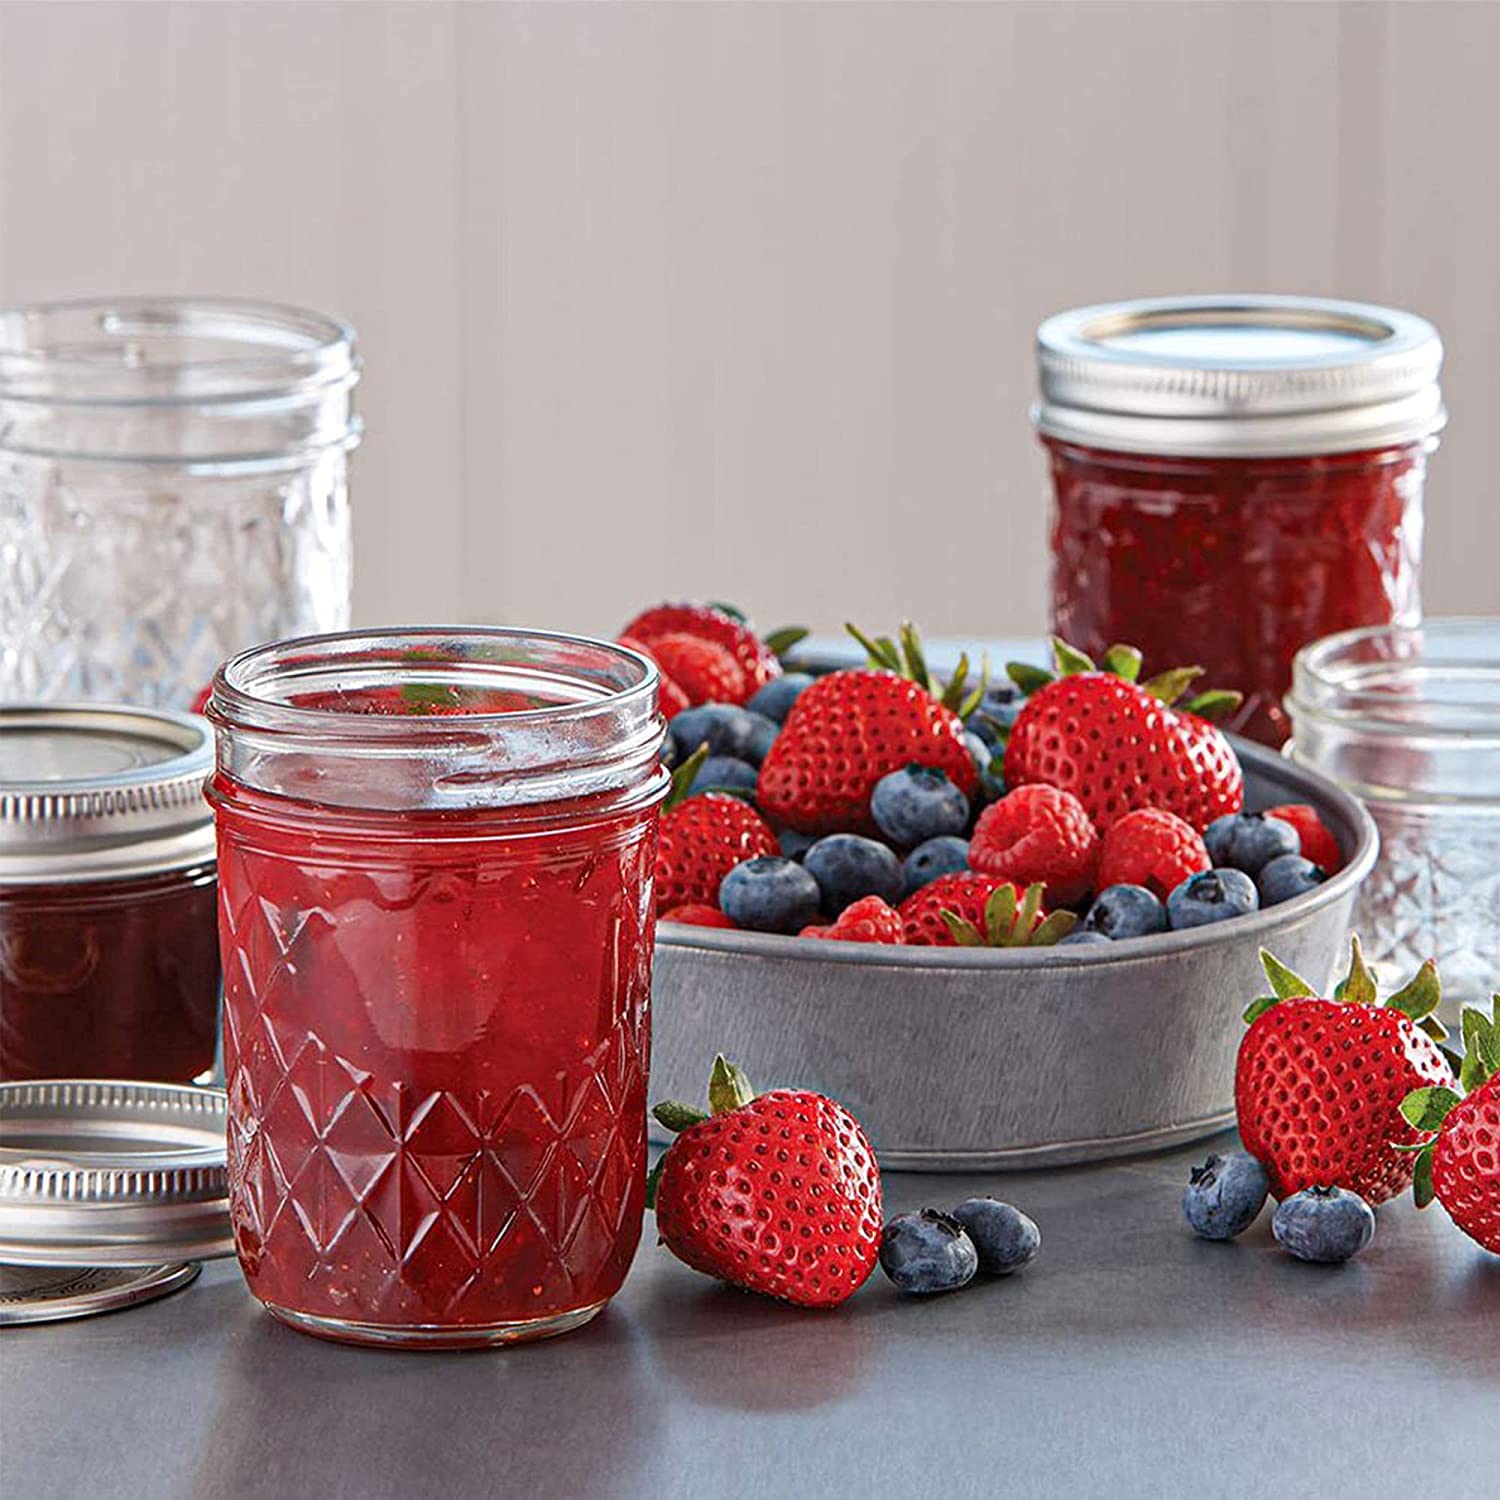 Regular Mouth Mason Jar 8 oz - (4 Pack) - Ball Regular Mouth Mason Jars With Airtight lids and Bands - For Canning, Fermenting, Pickling, Freezing - Glass jar, Microwave & Dishwasher Safe